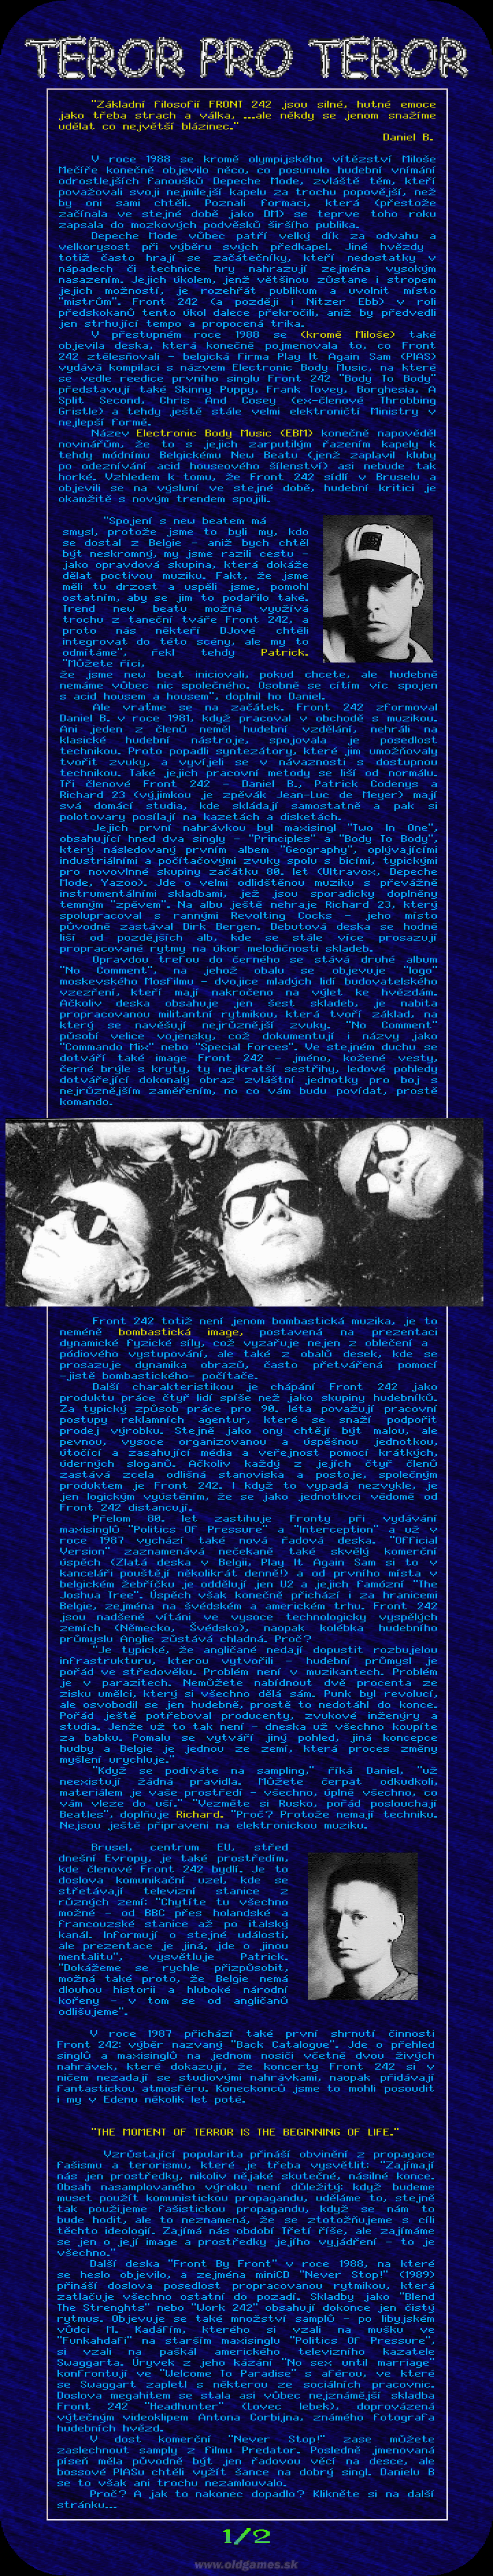 Front 242 (1/2)